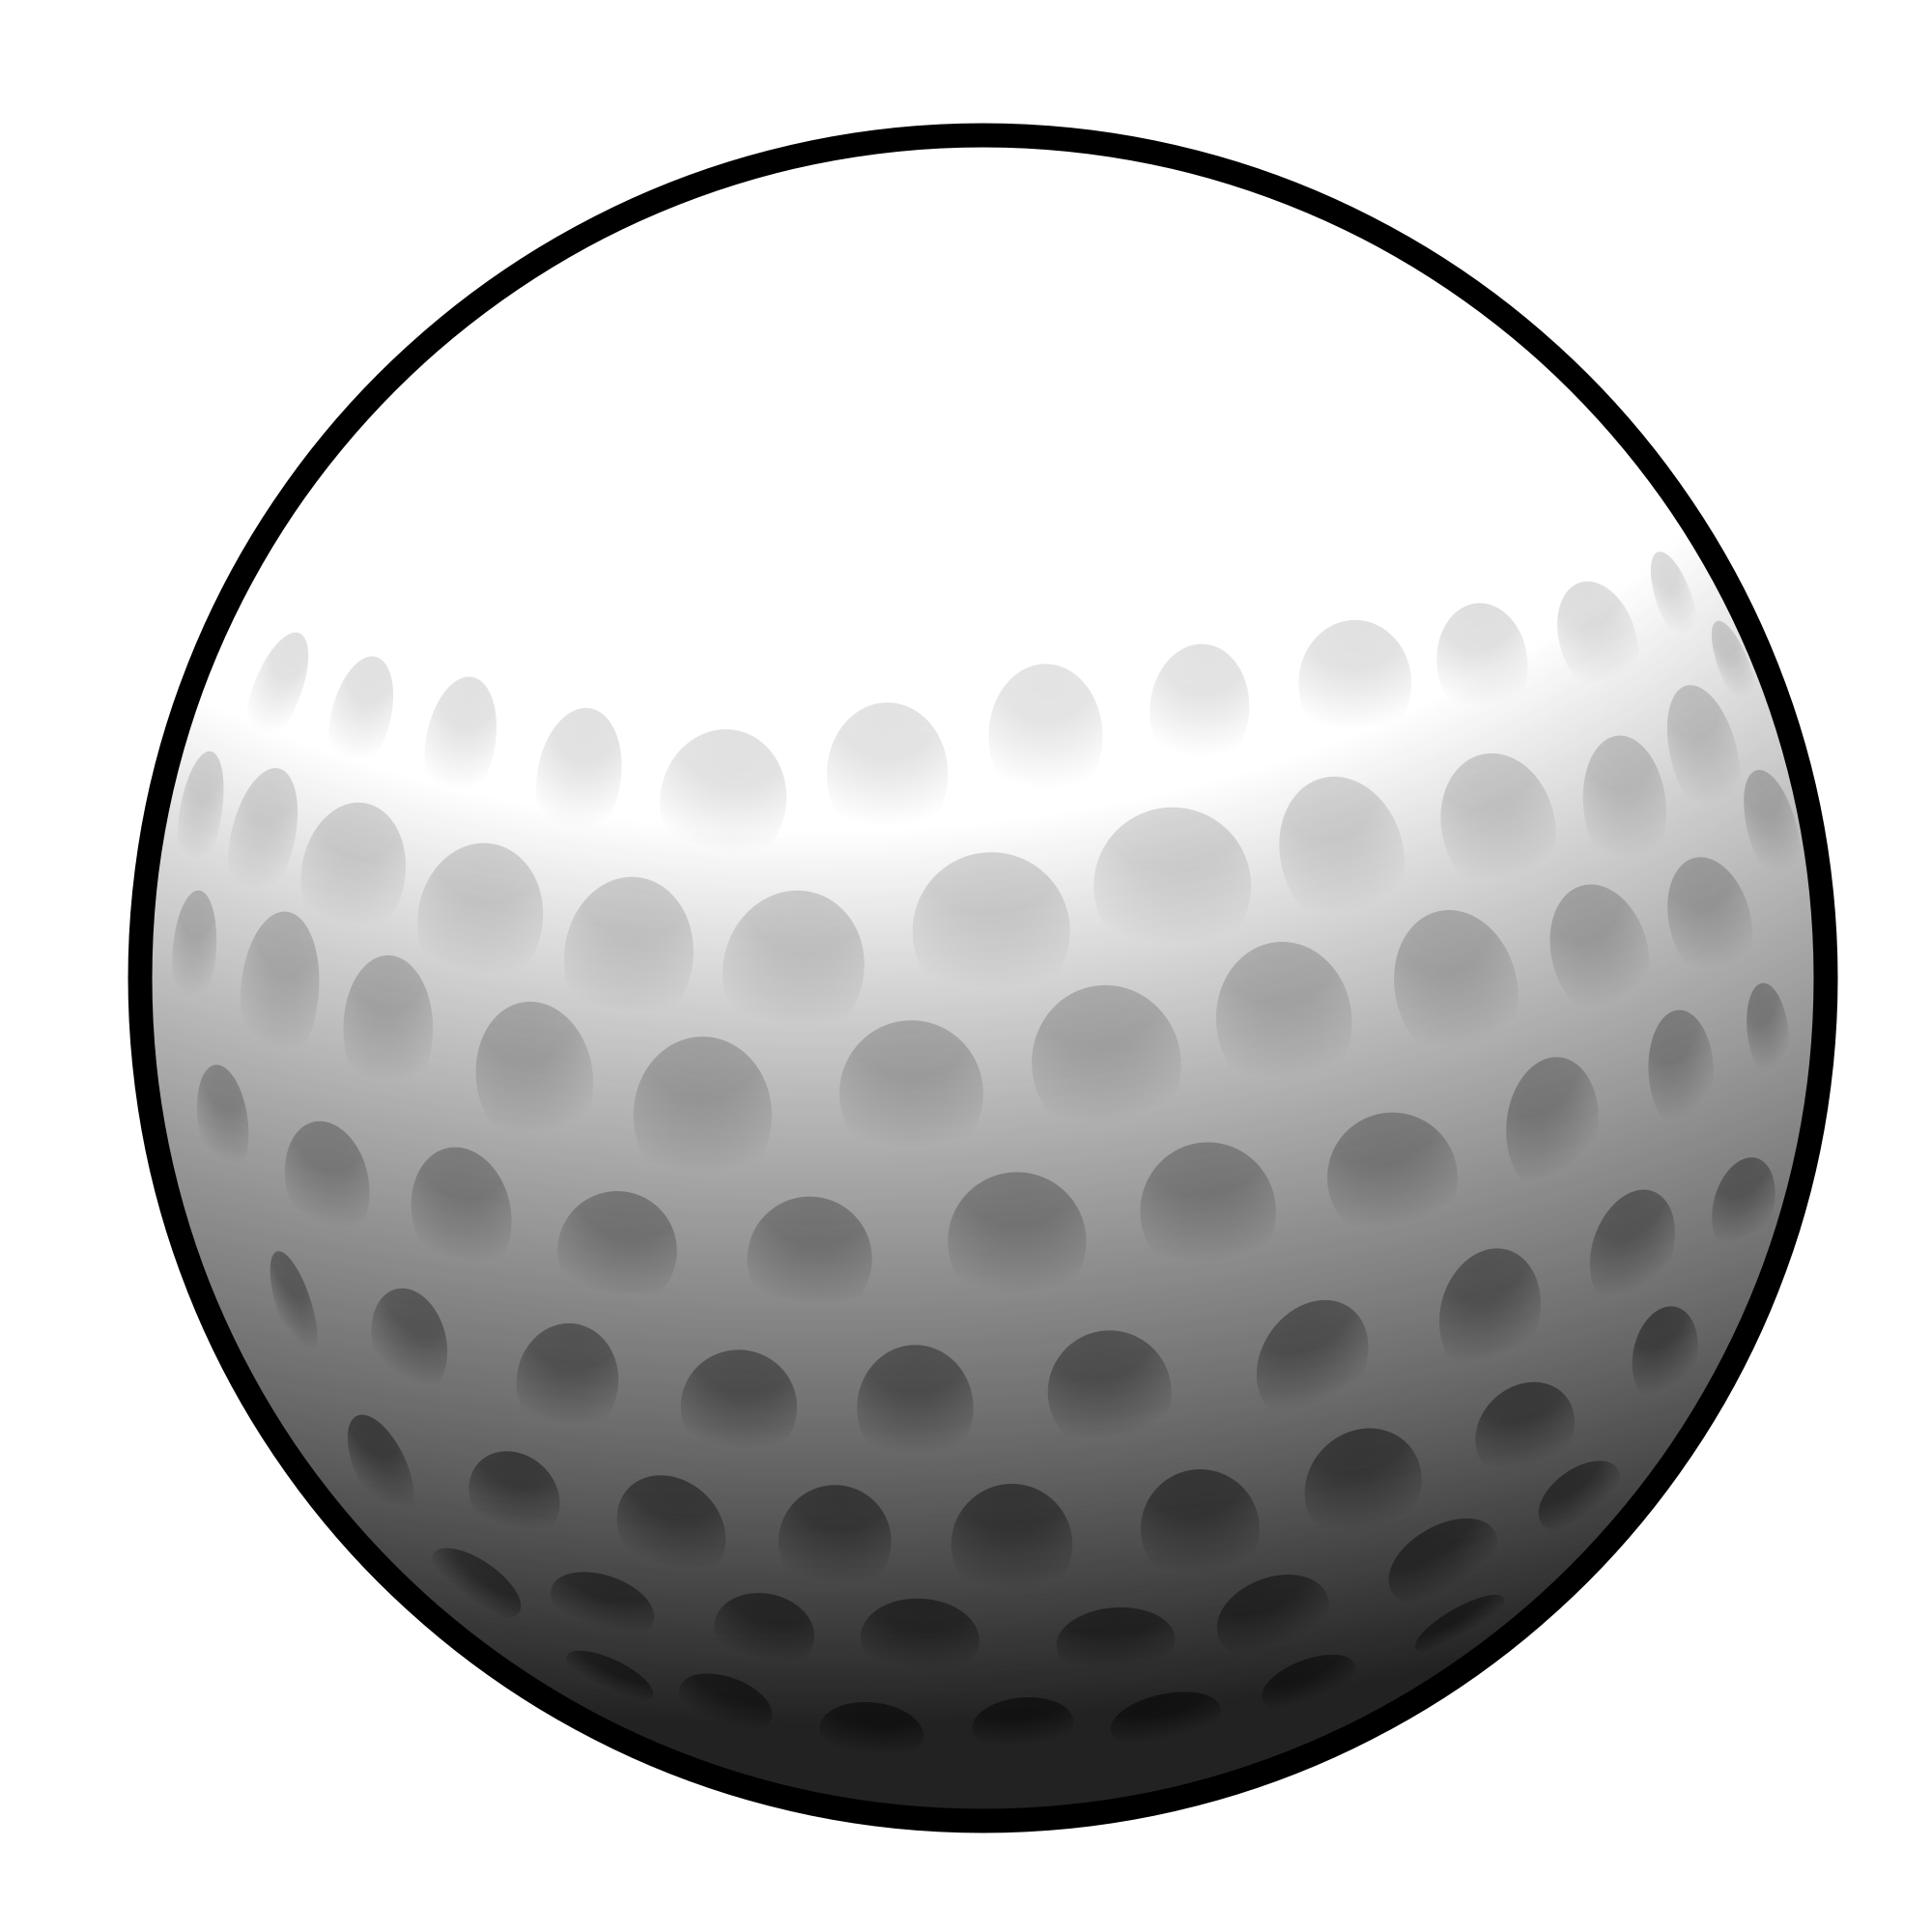 Open In Media Viewerconfiguration. A Golf Ball - Golf Ball, Transparent background PNG HD thumbnail